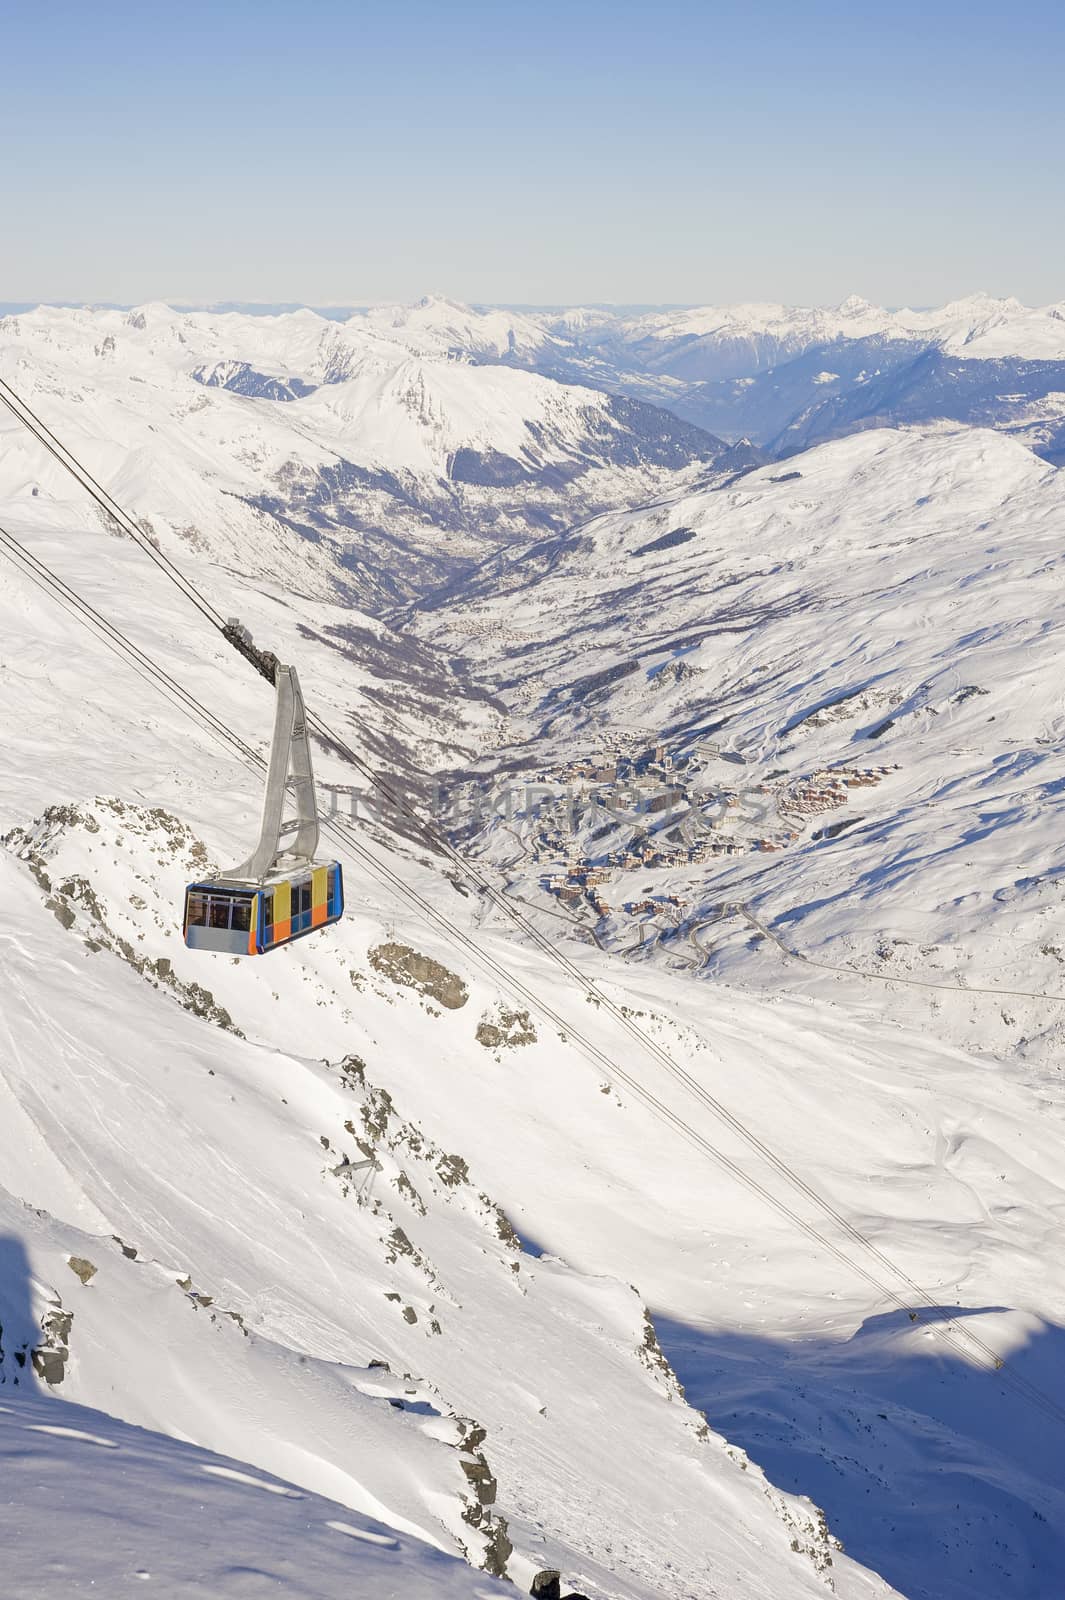 Large cable car ascending a snowy mountain valley